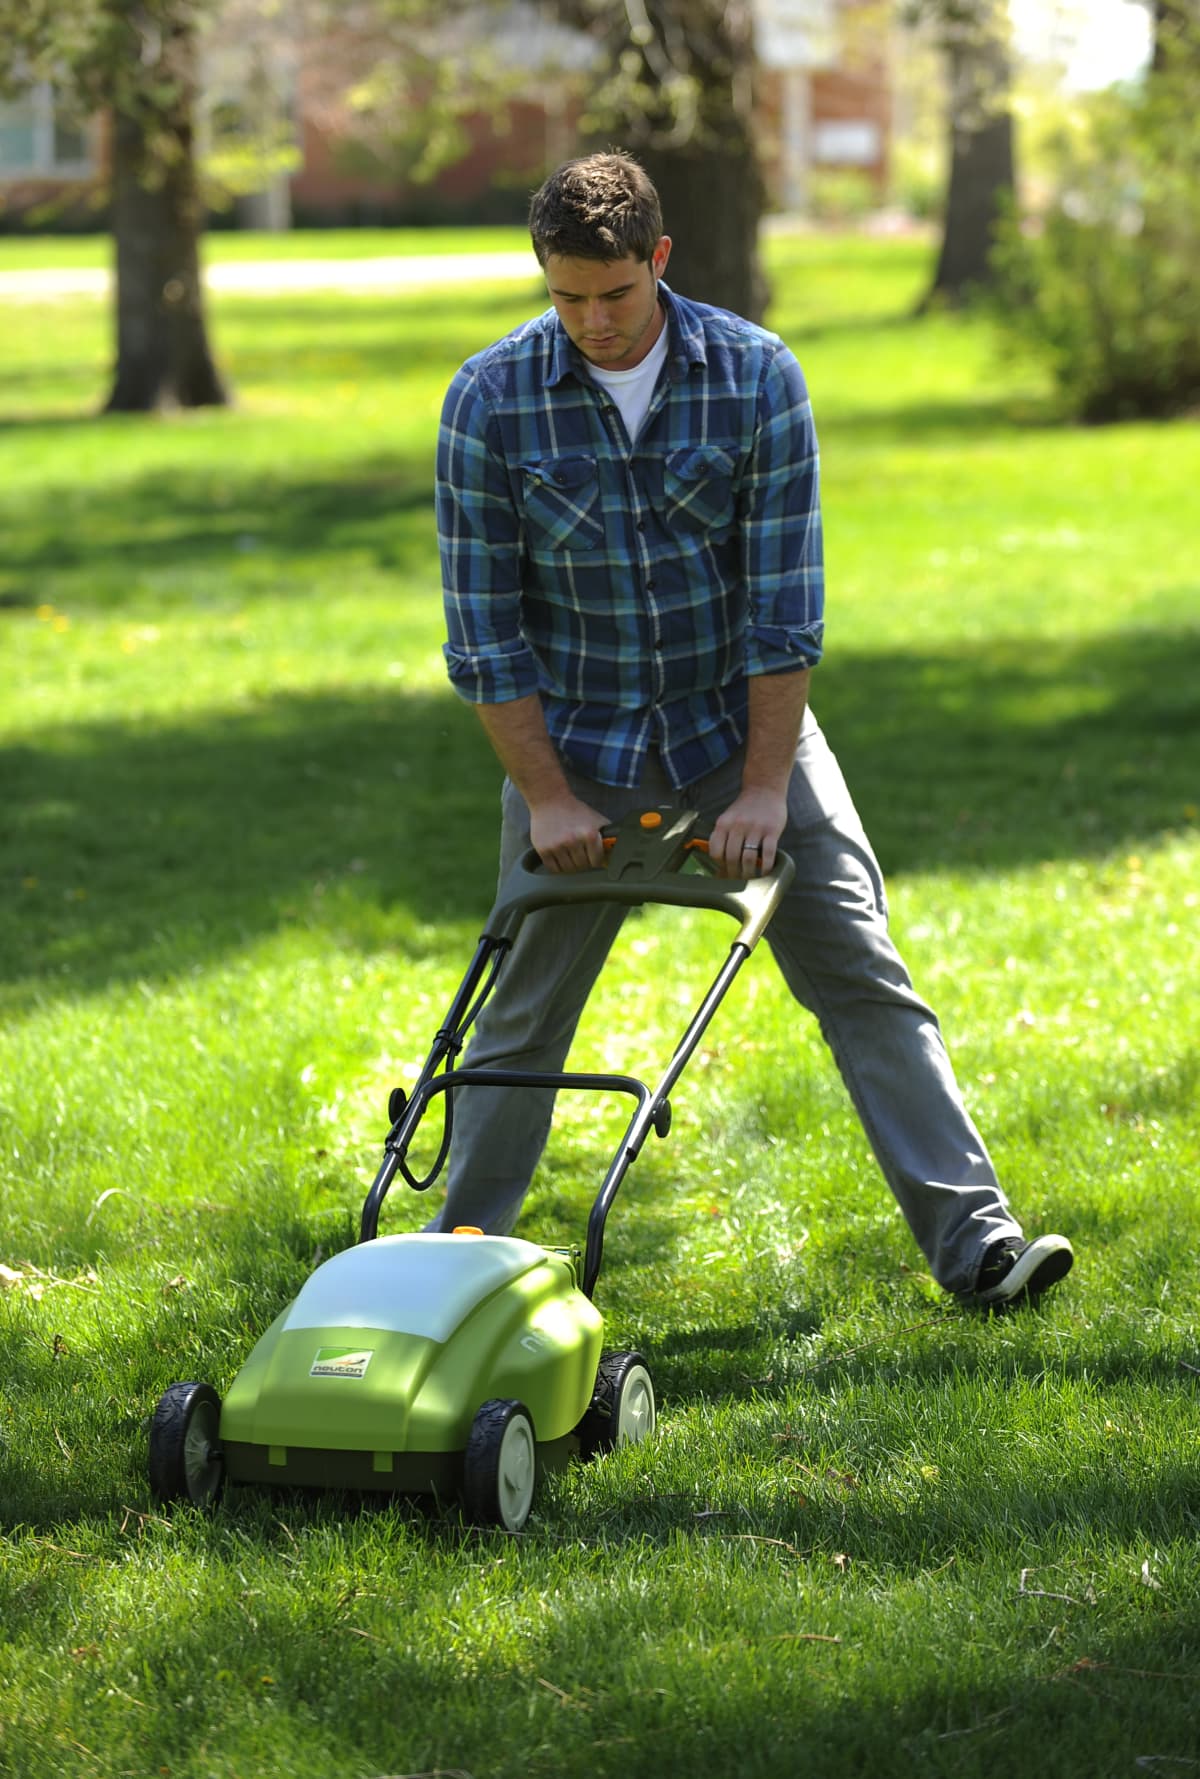 A man operating a battery-powered lawn mower on a green lawn